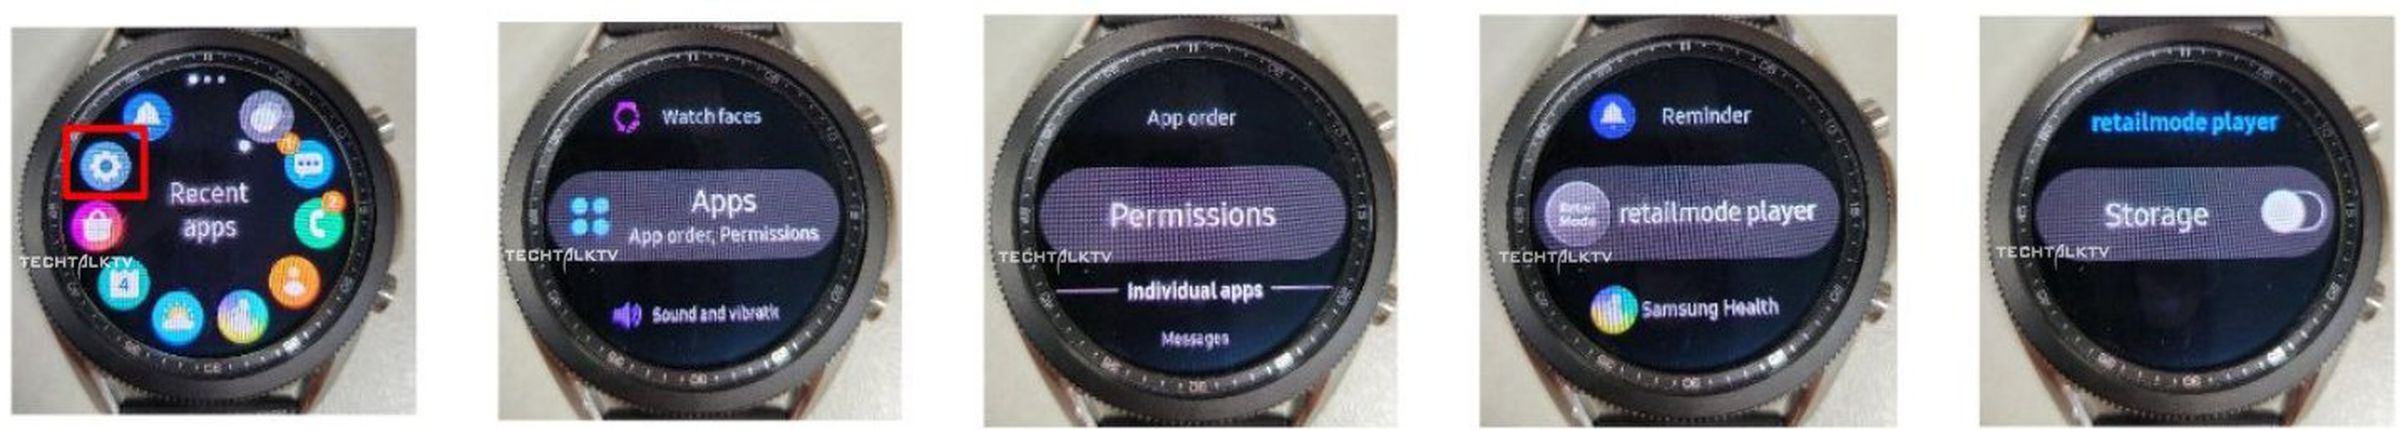 The images show icons for Samsung’s typical smart watch apps, although some of the designs have changed slightly.